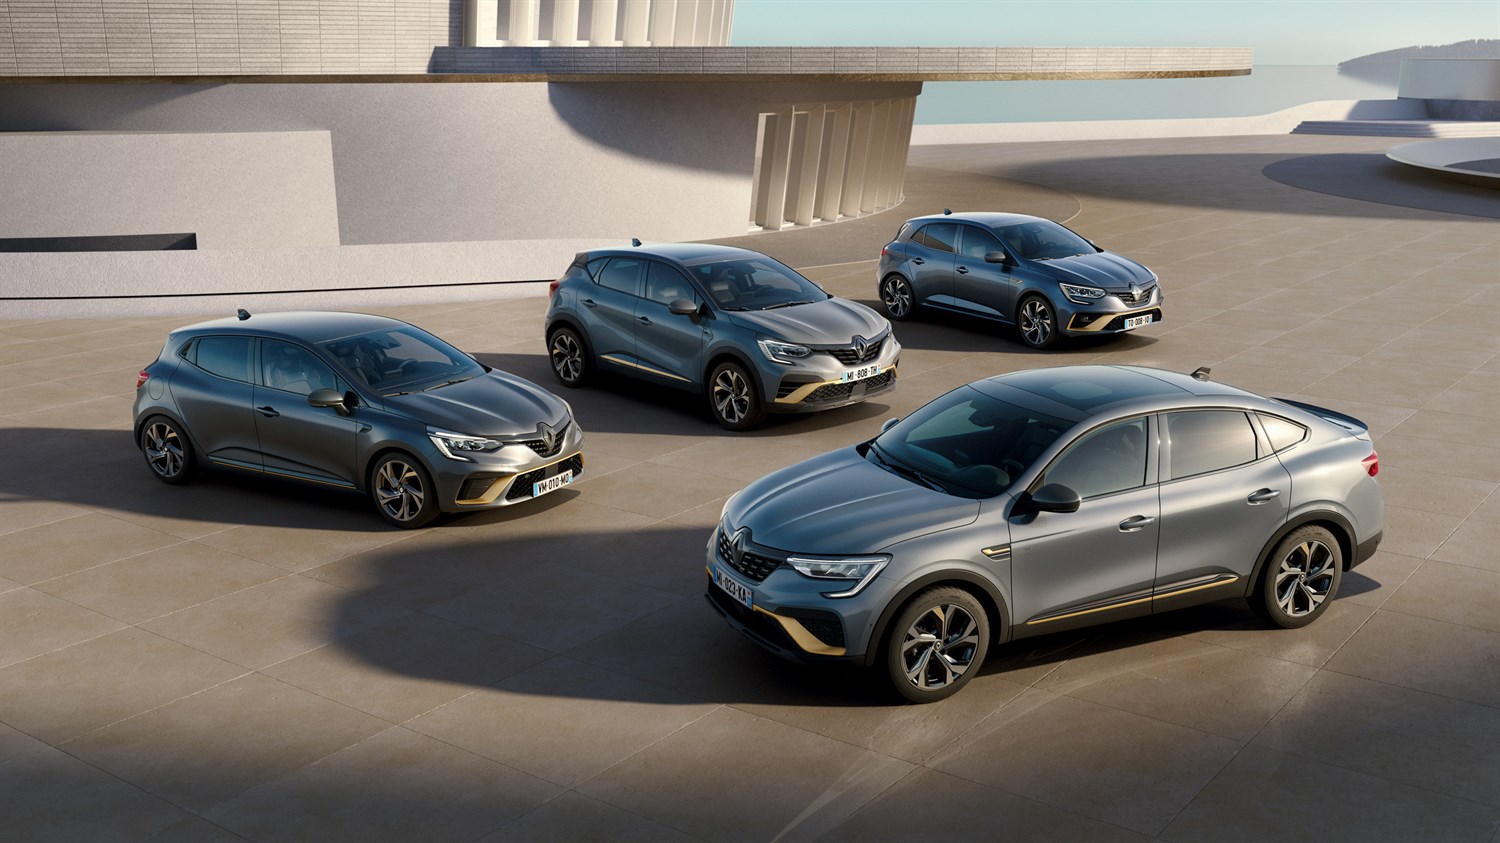 vehicles equipped with Renault E-Tech full hybrid technology